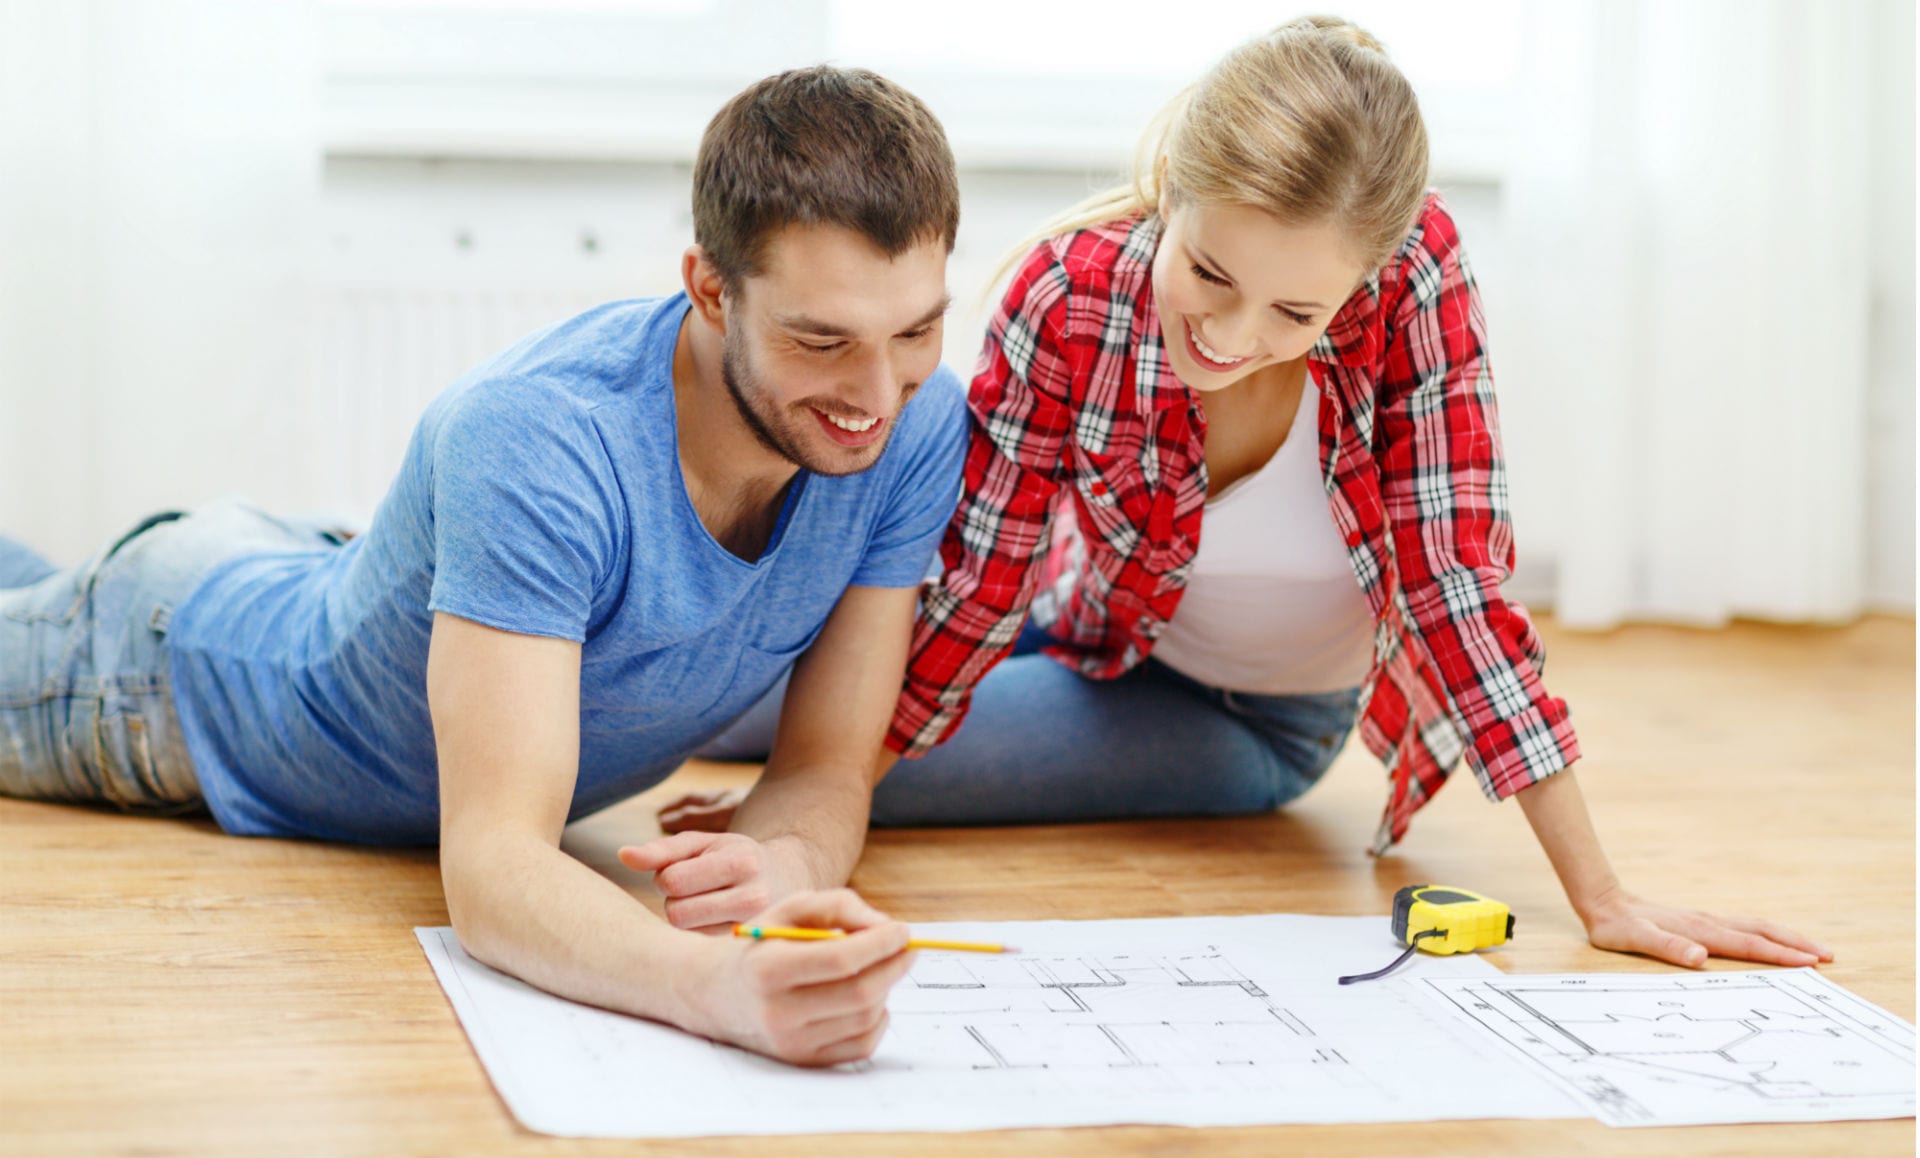 5 Things to Consider When Planning for a Home Room Addition